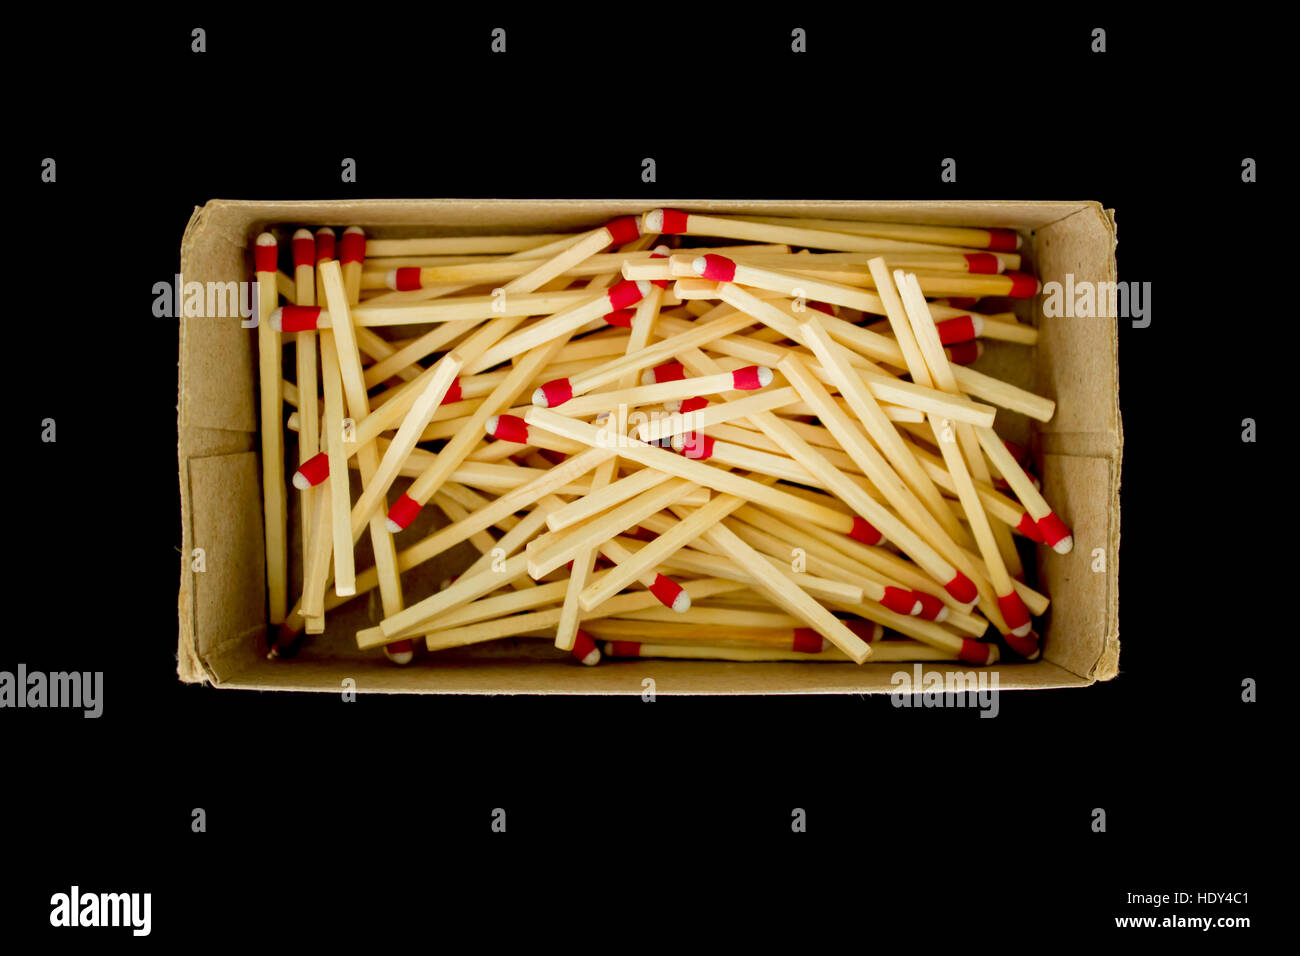 A box of strike-anywhere matches isolated on a black background. Photographed from above. Stock Photo